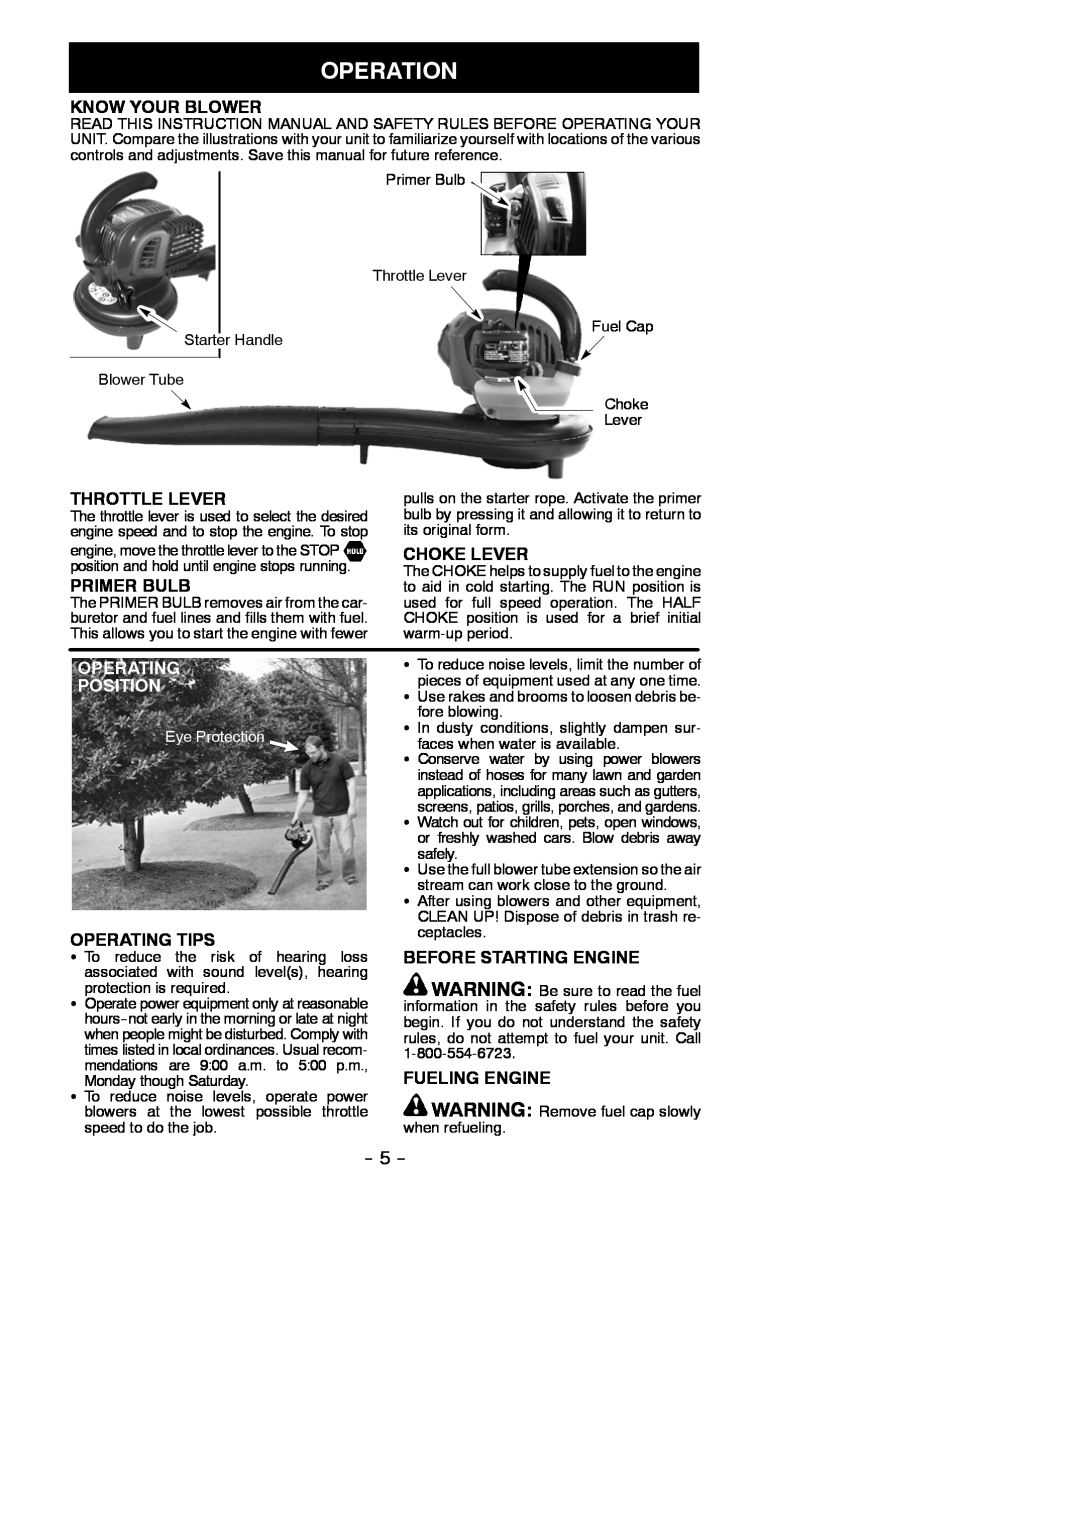 Weed Eater 952711937 Operation, Know Your Blower, Throttle Lever, Choke Lever, Primer Bulb, Operating, Position 